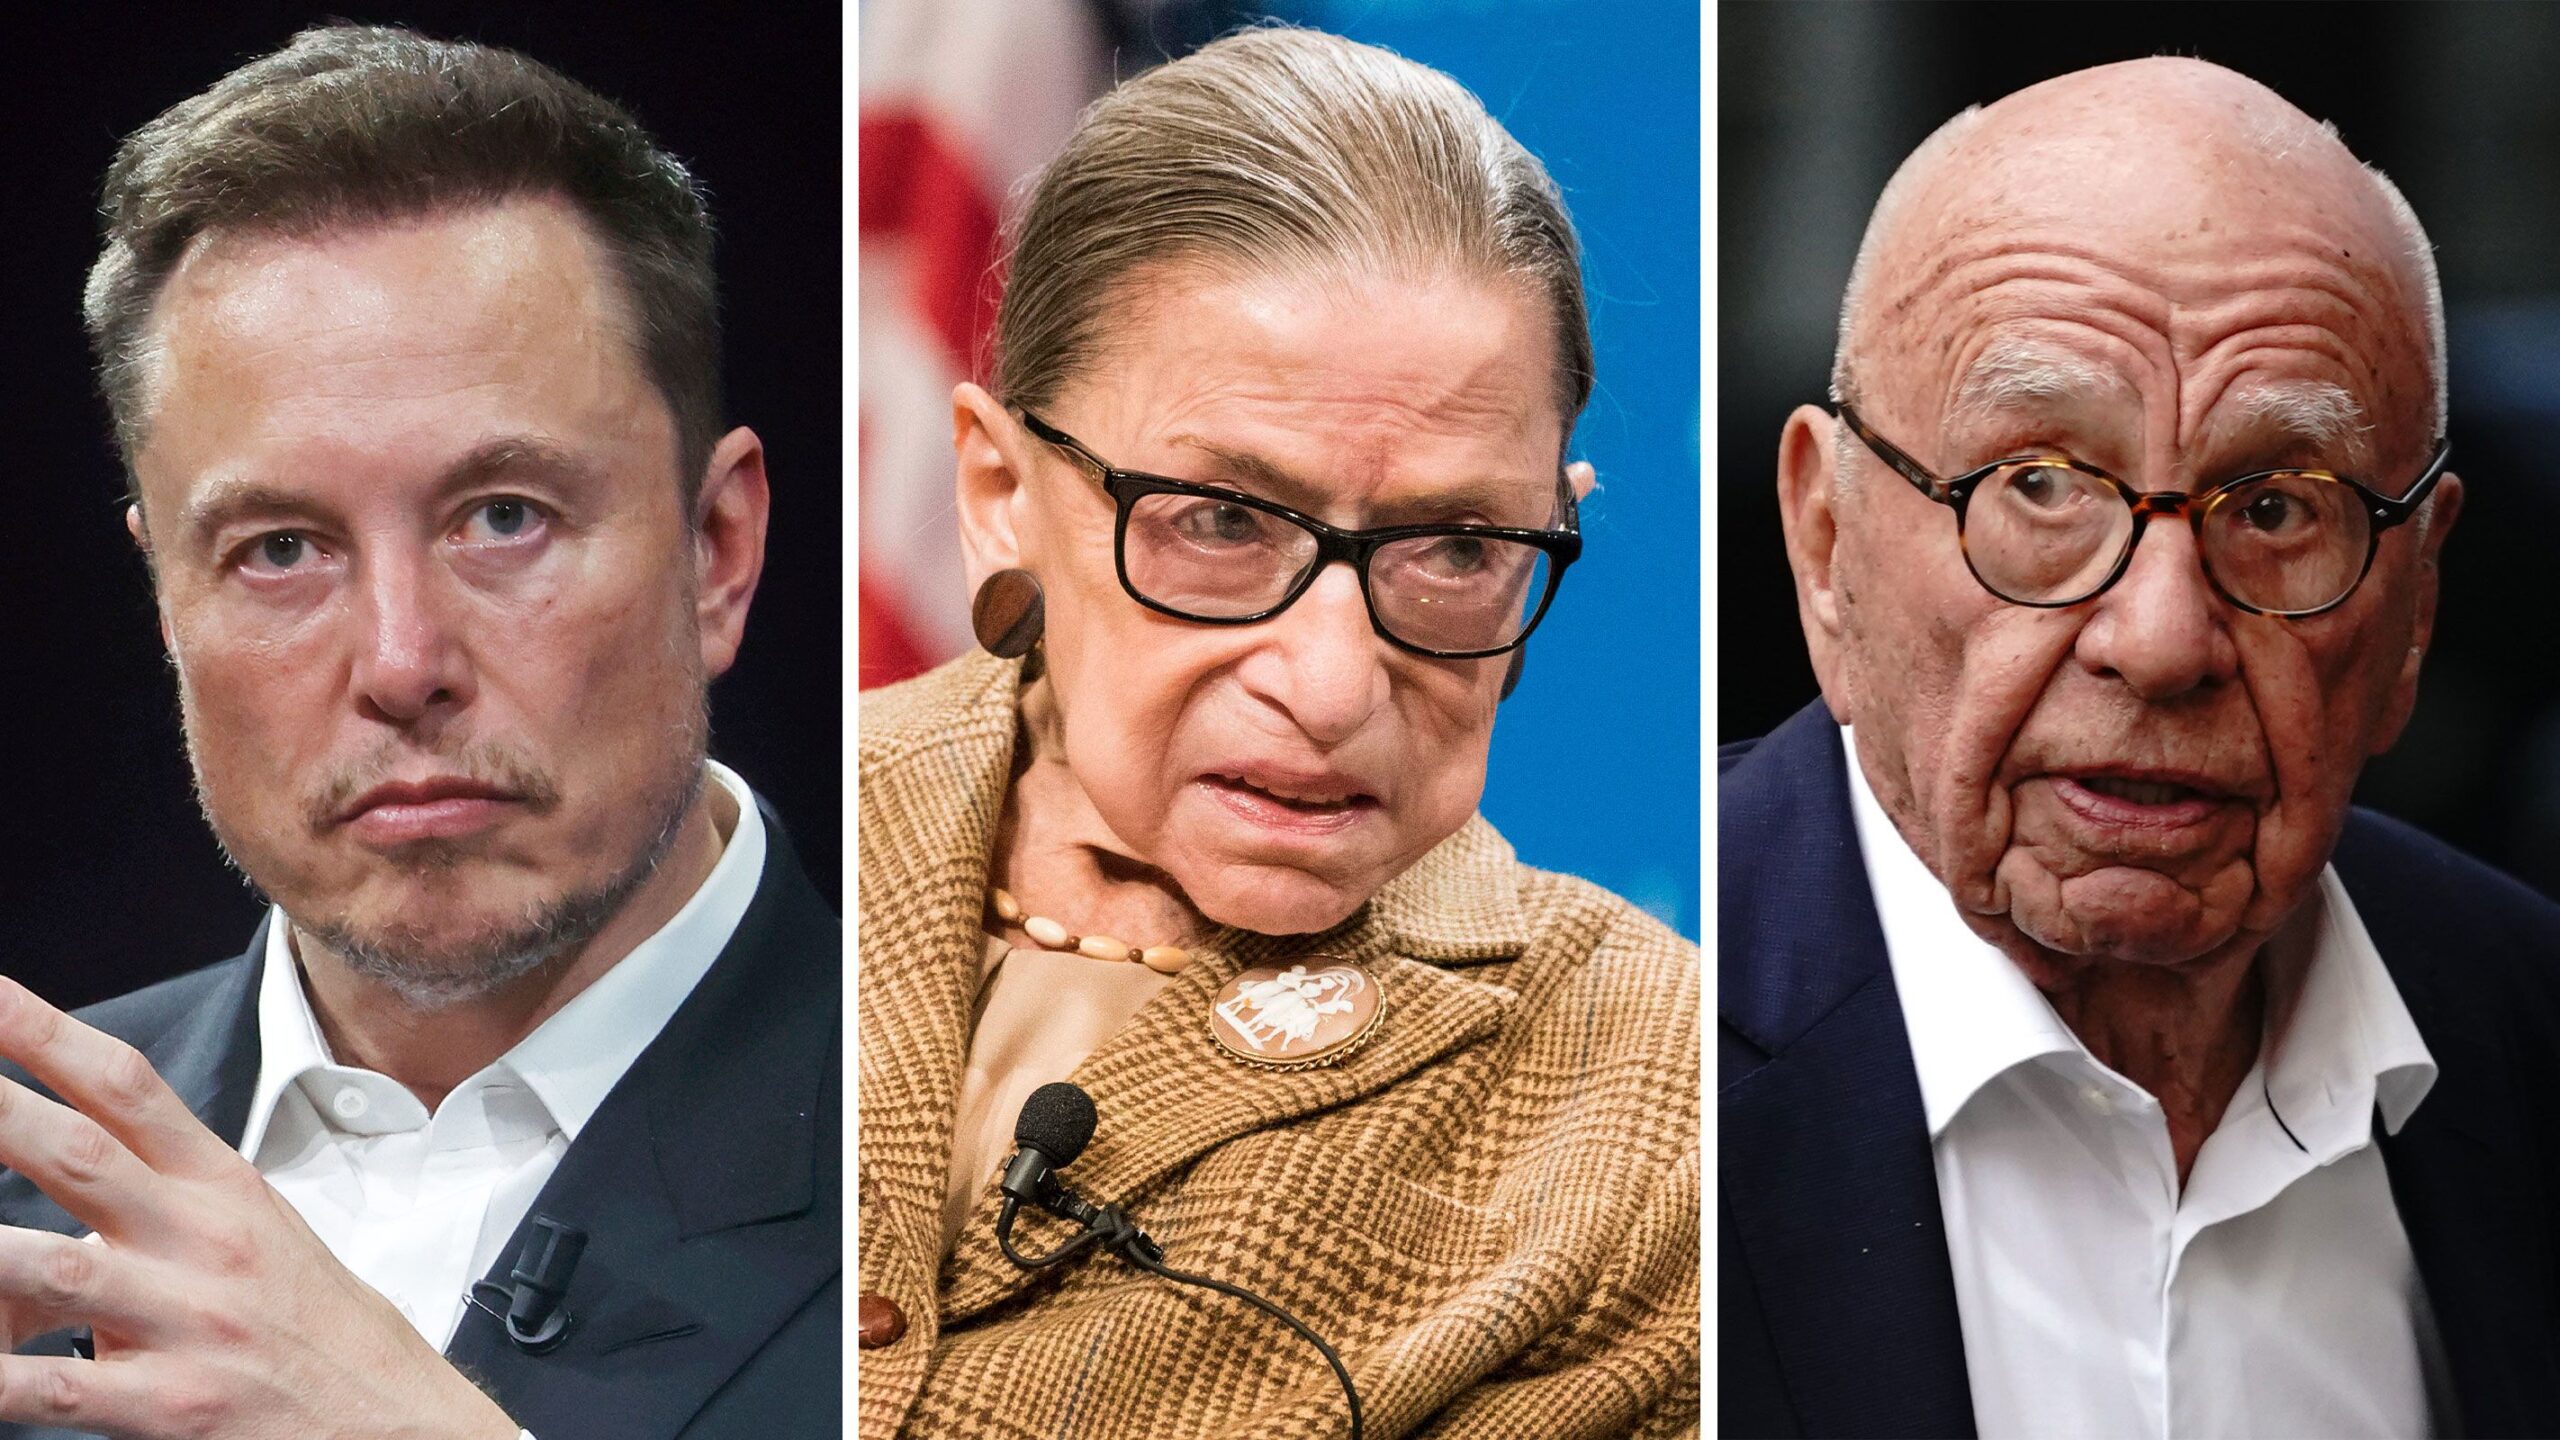 Elon Musk, Supreme Court Justice Ruth Bader Ginsburg and Rupert Murdoch are pictured in a split ima...